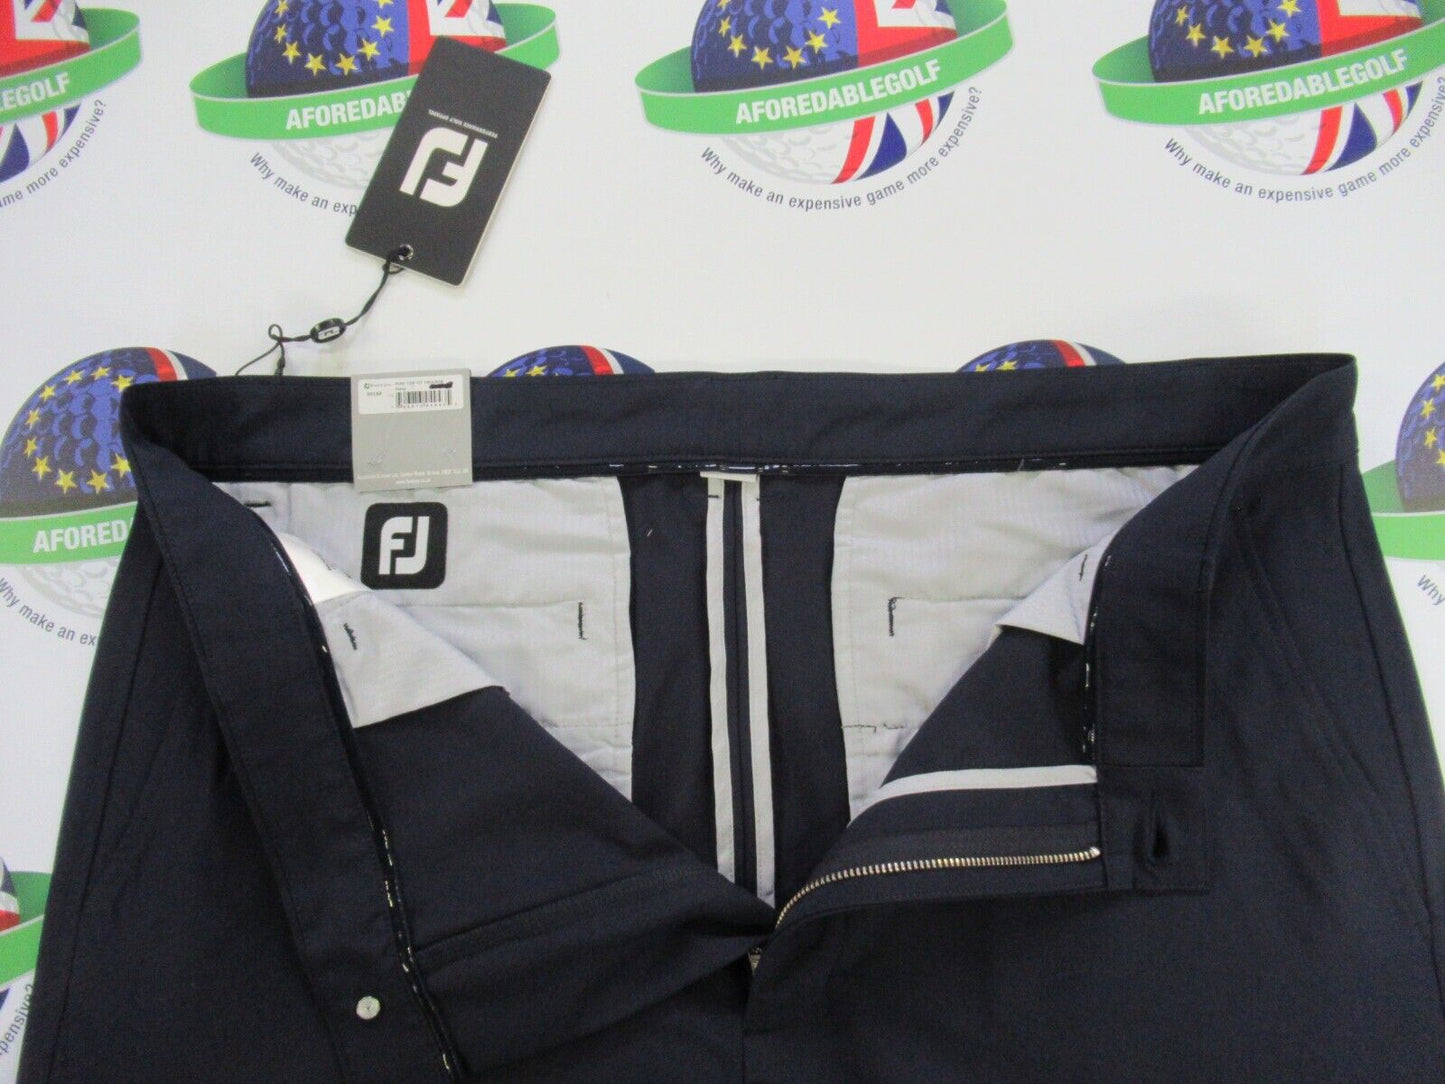 footjoy performance tapered fit trousers navy waist 36" x leg 32"